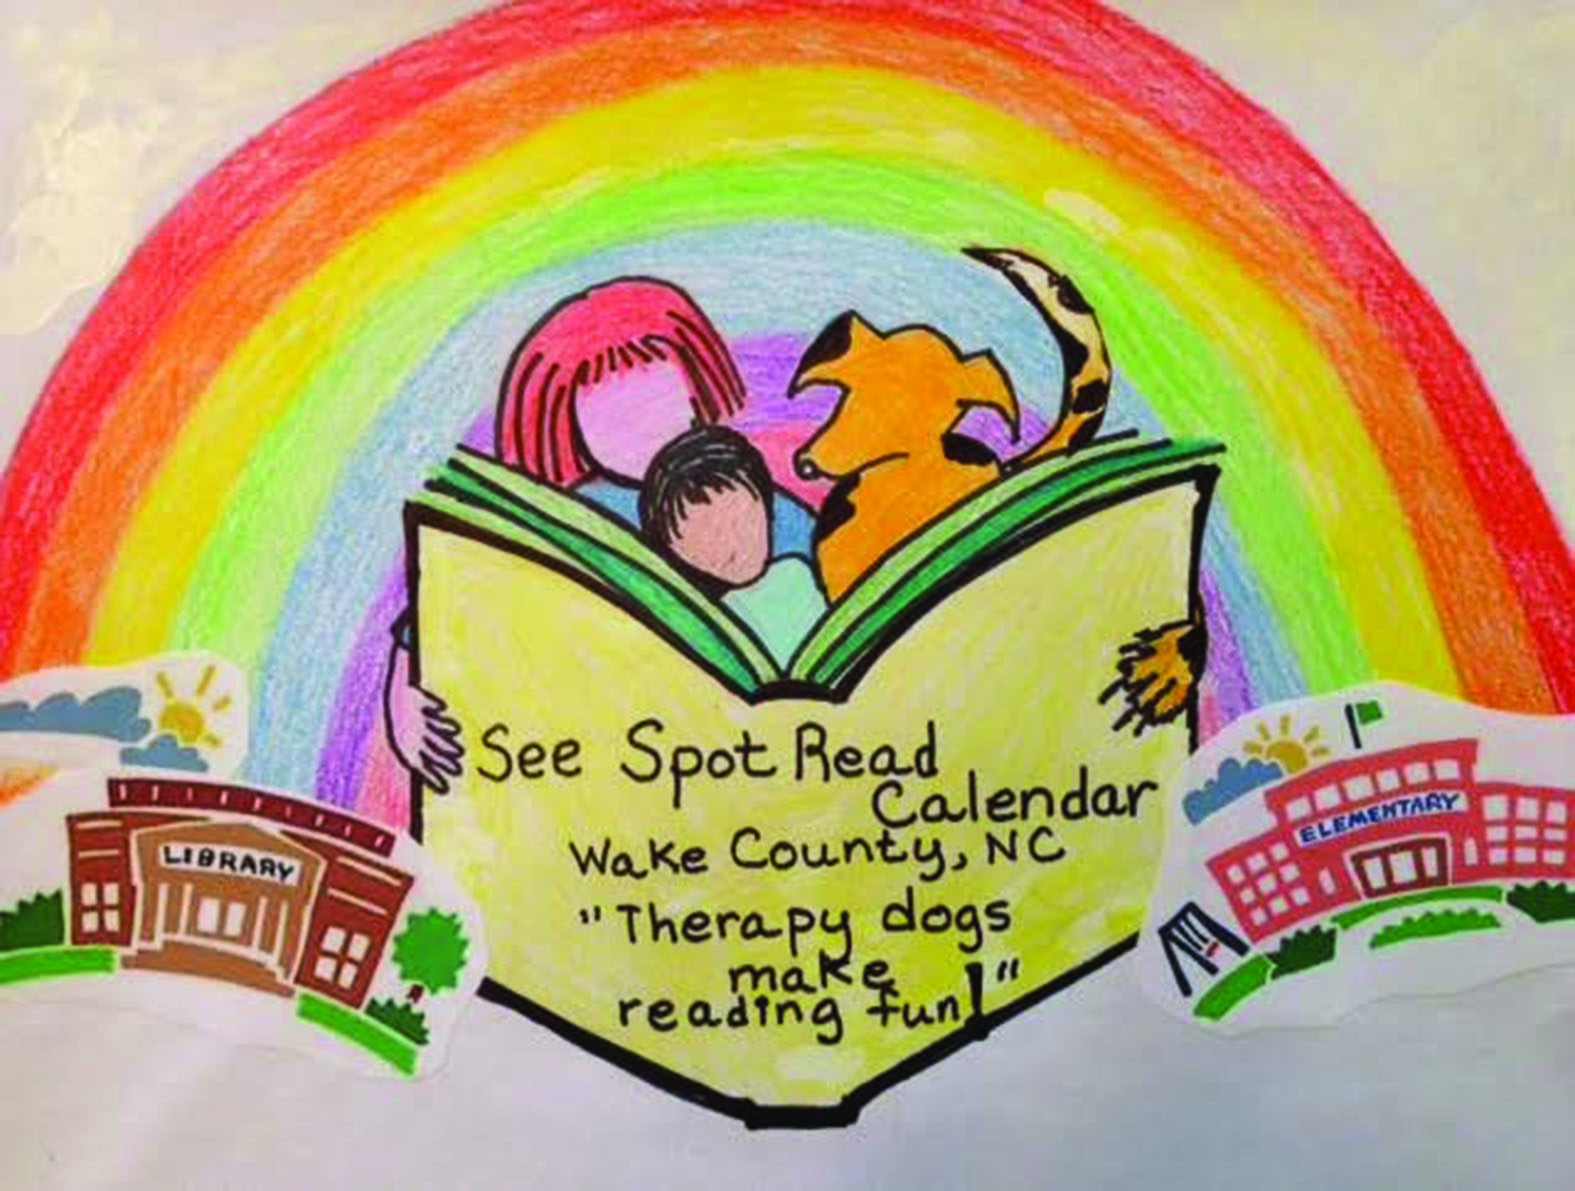 See Spot Read - Therapy Dogs Foster Kids’ Love of Reading  By Amy Iori